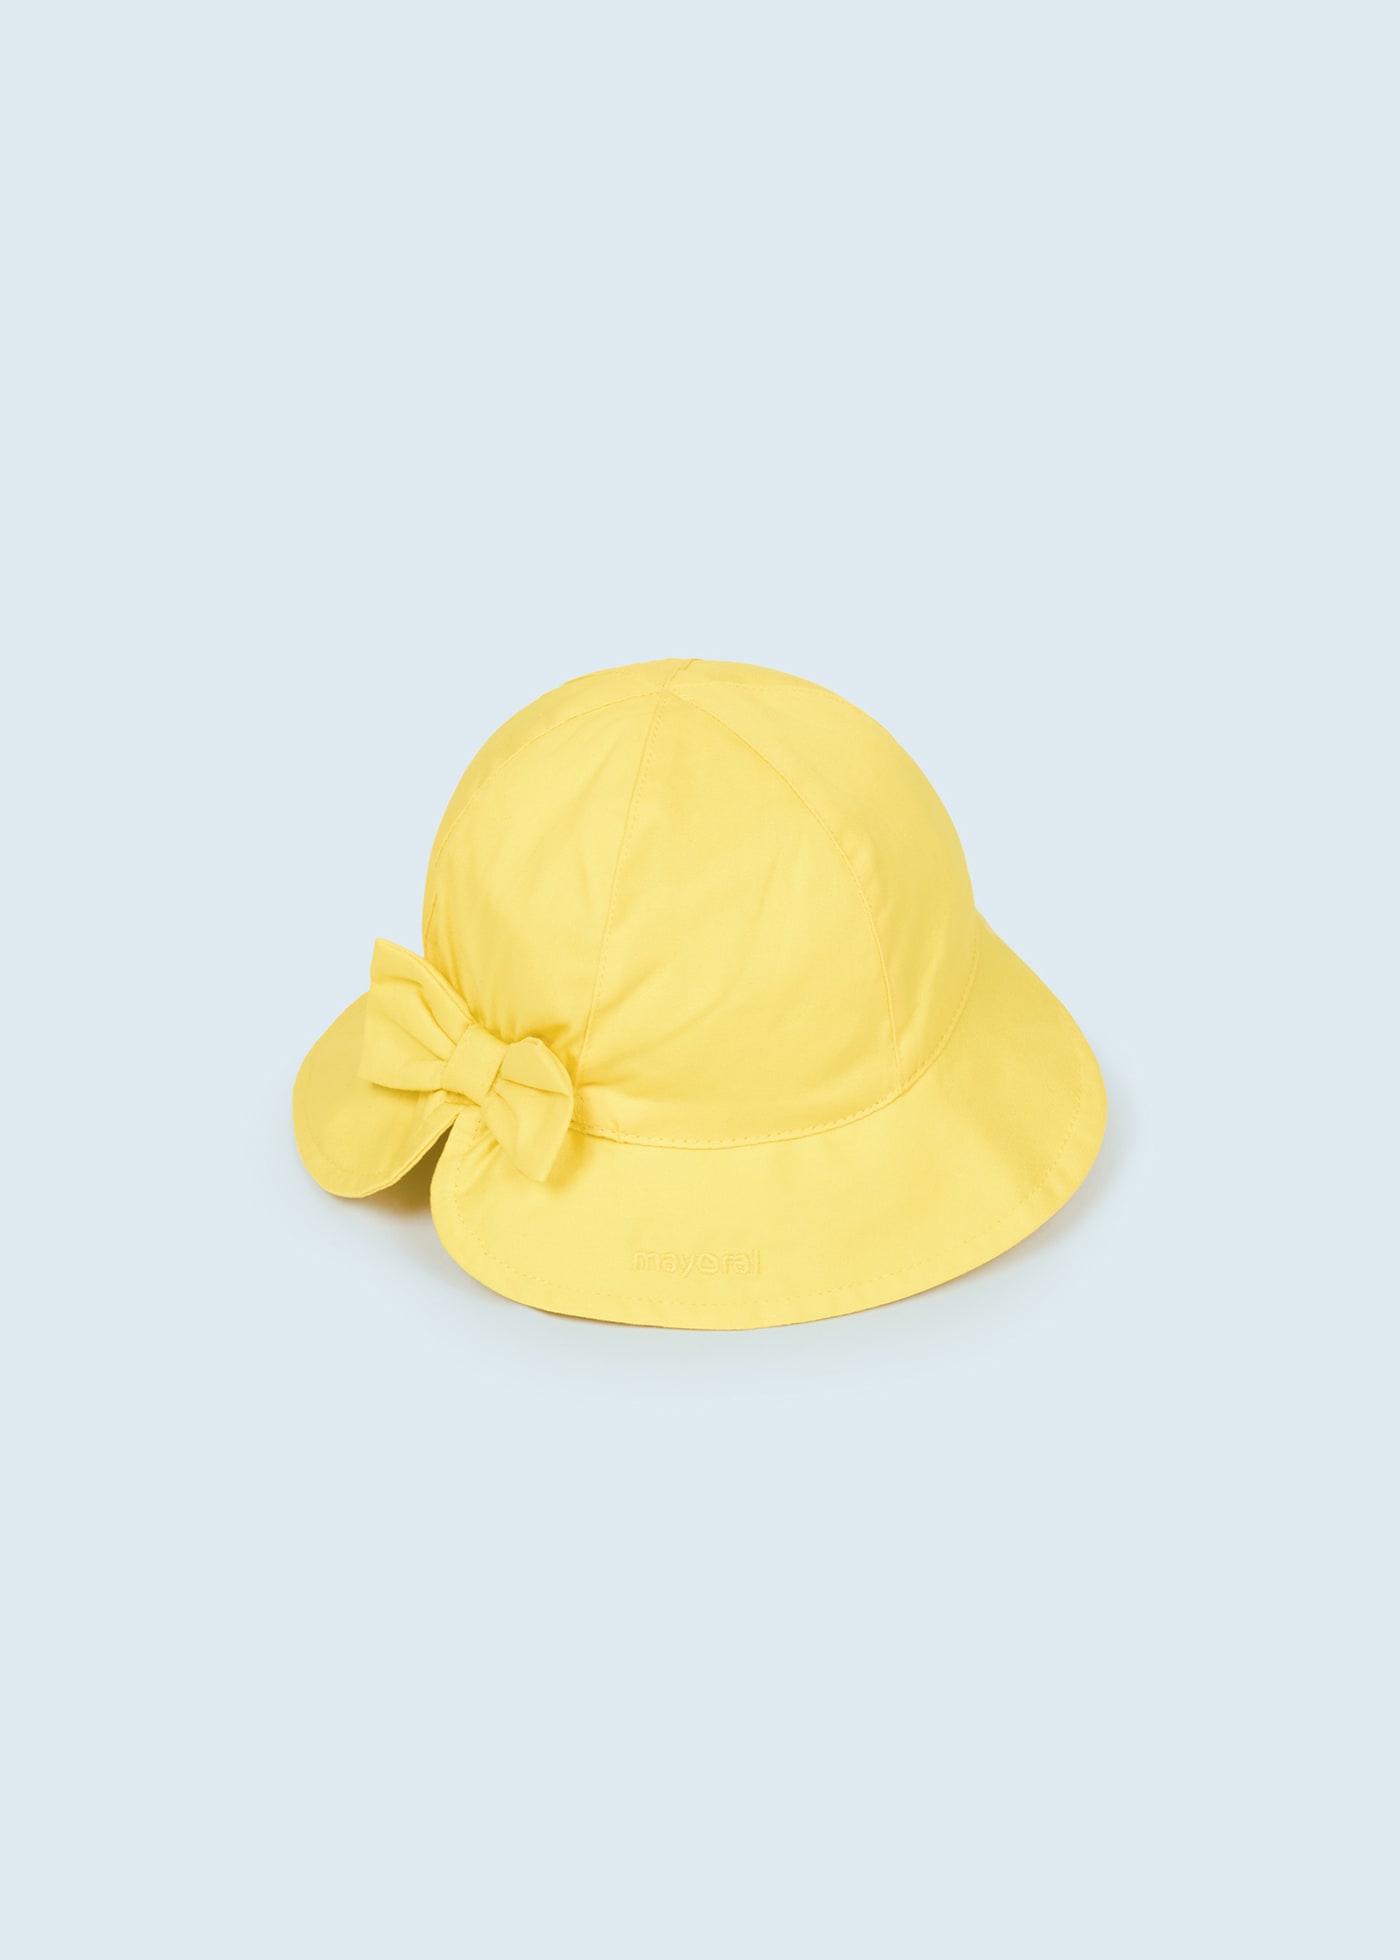 Sustainable cotton hat baby